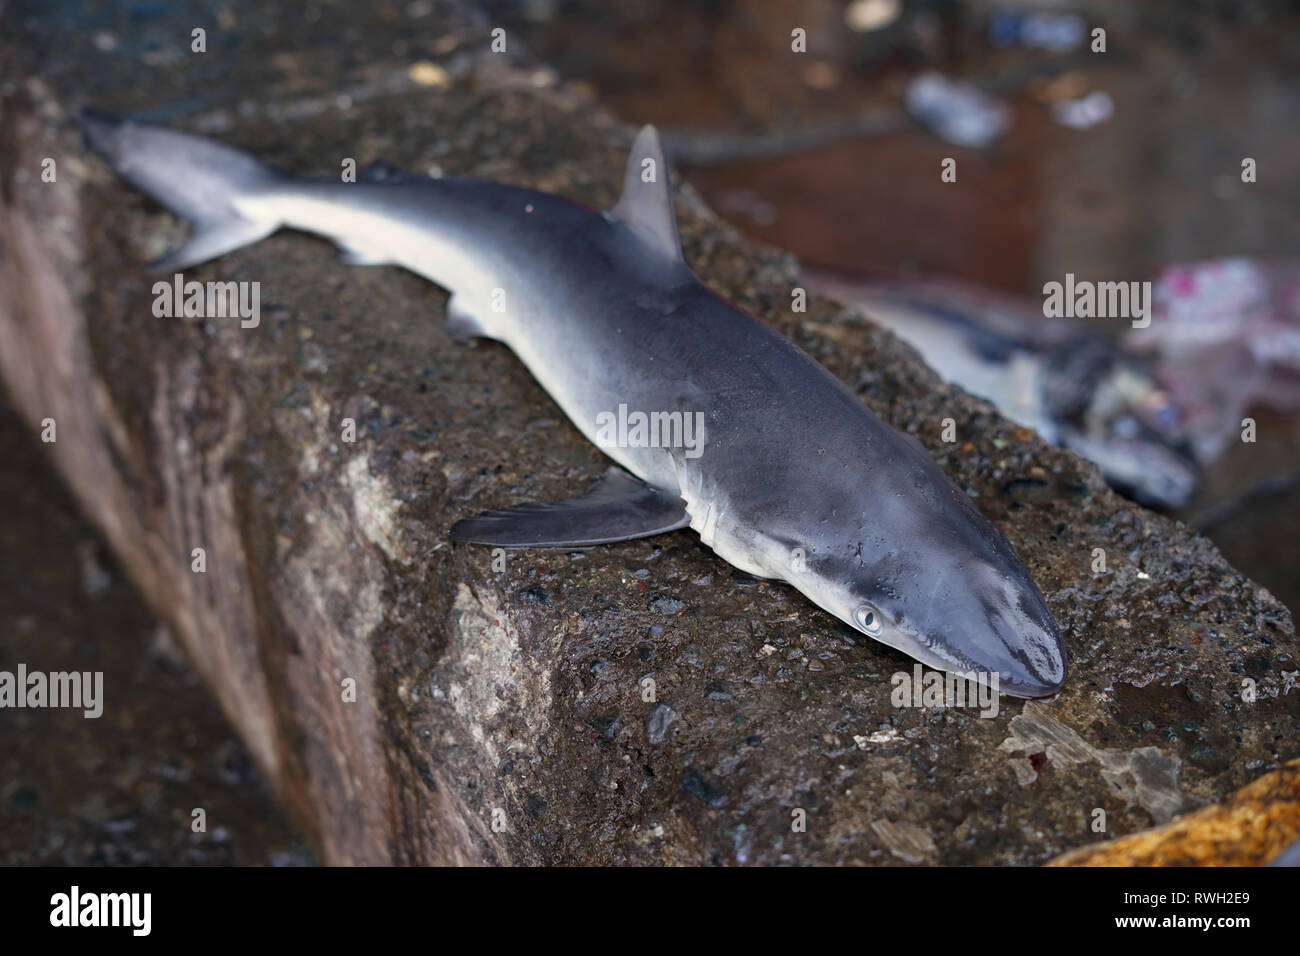 Baby Sharks for sale in Traditional Seafood market Stock Photo